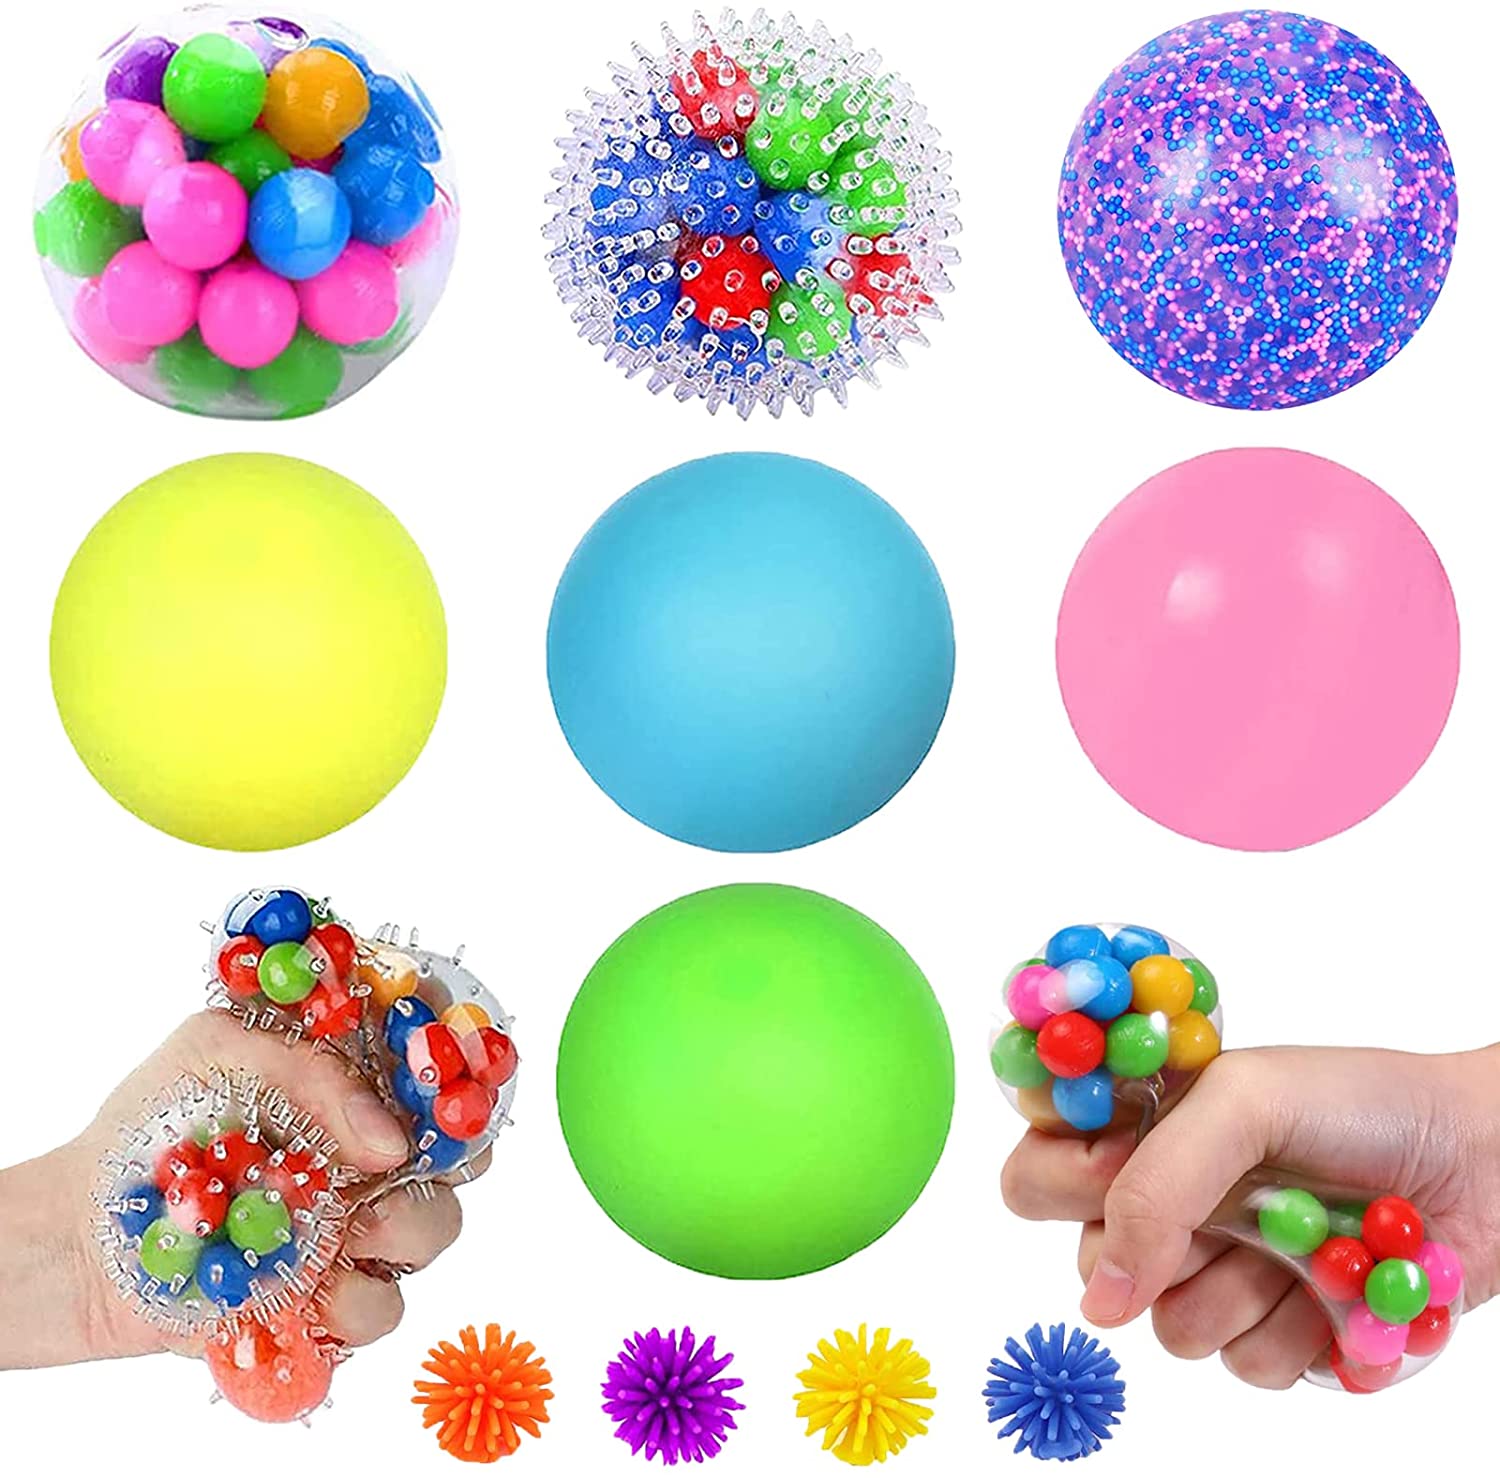 Stress Balls Fidget Toys For Kids Pack Sensory Stress Relief Balls Sticky Glow Balls Fidget Balls Massage Ball, Kids Adults To Relax, Anxiety Relief, Decompress, Focus, Squeeze Toys